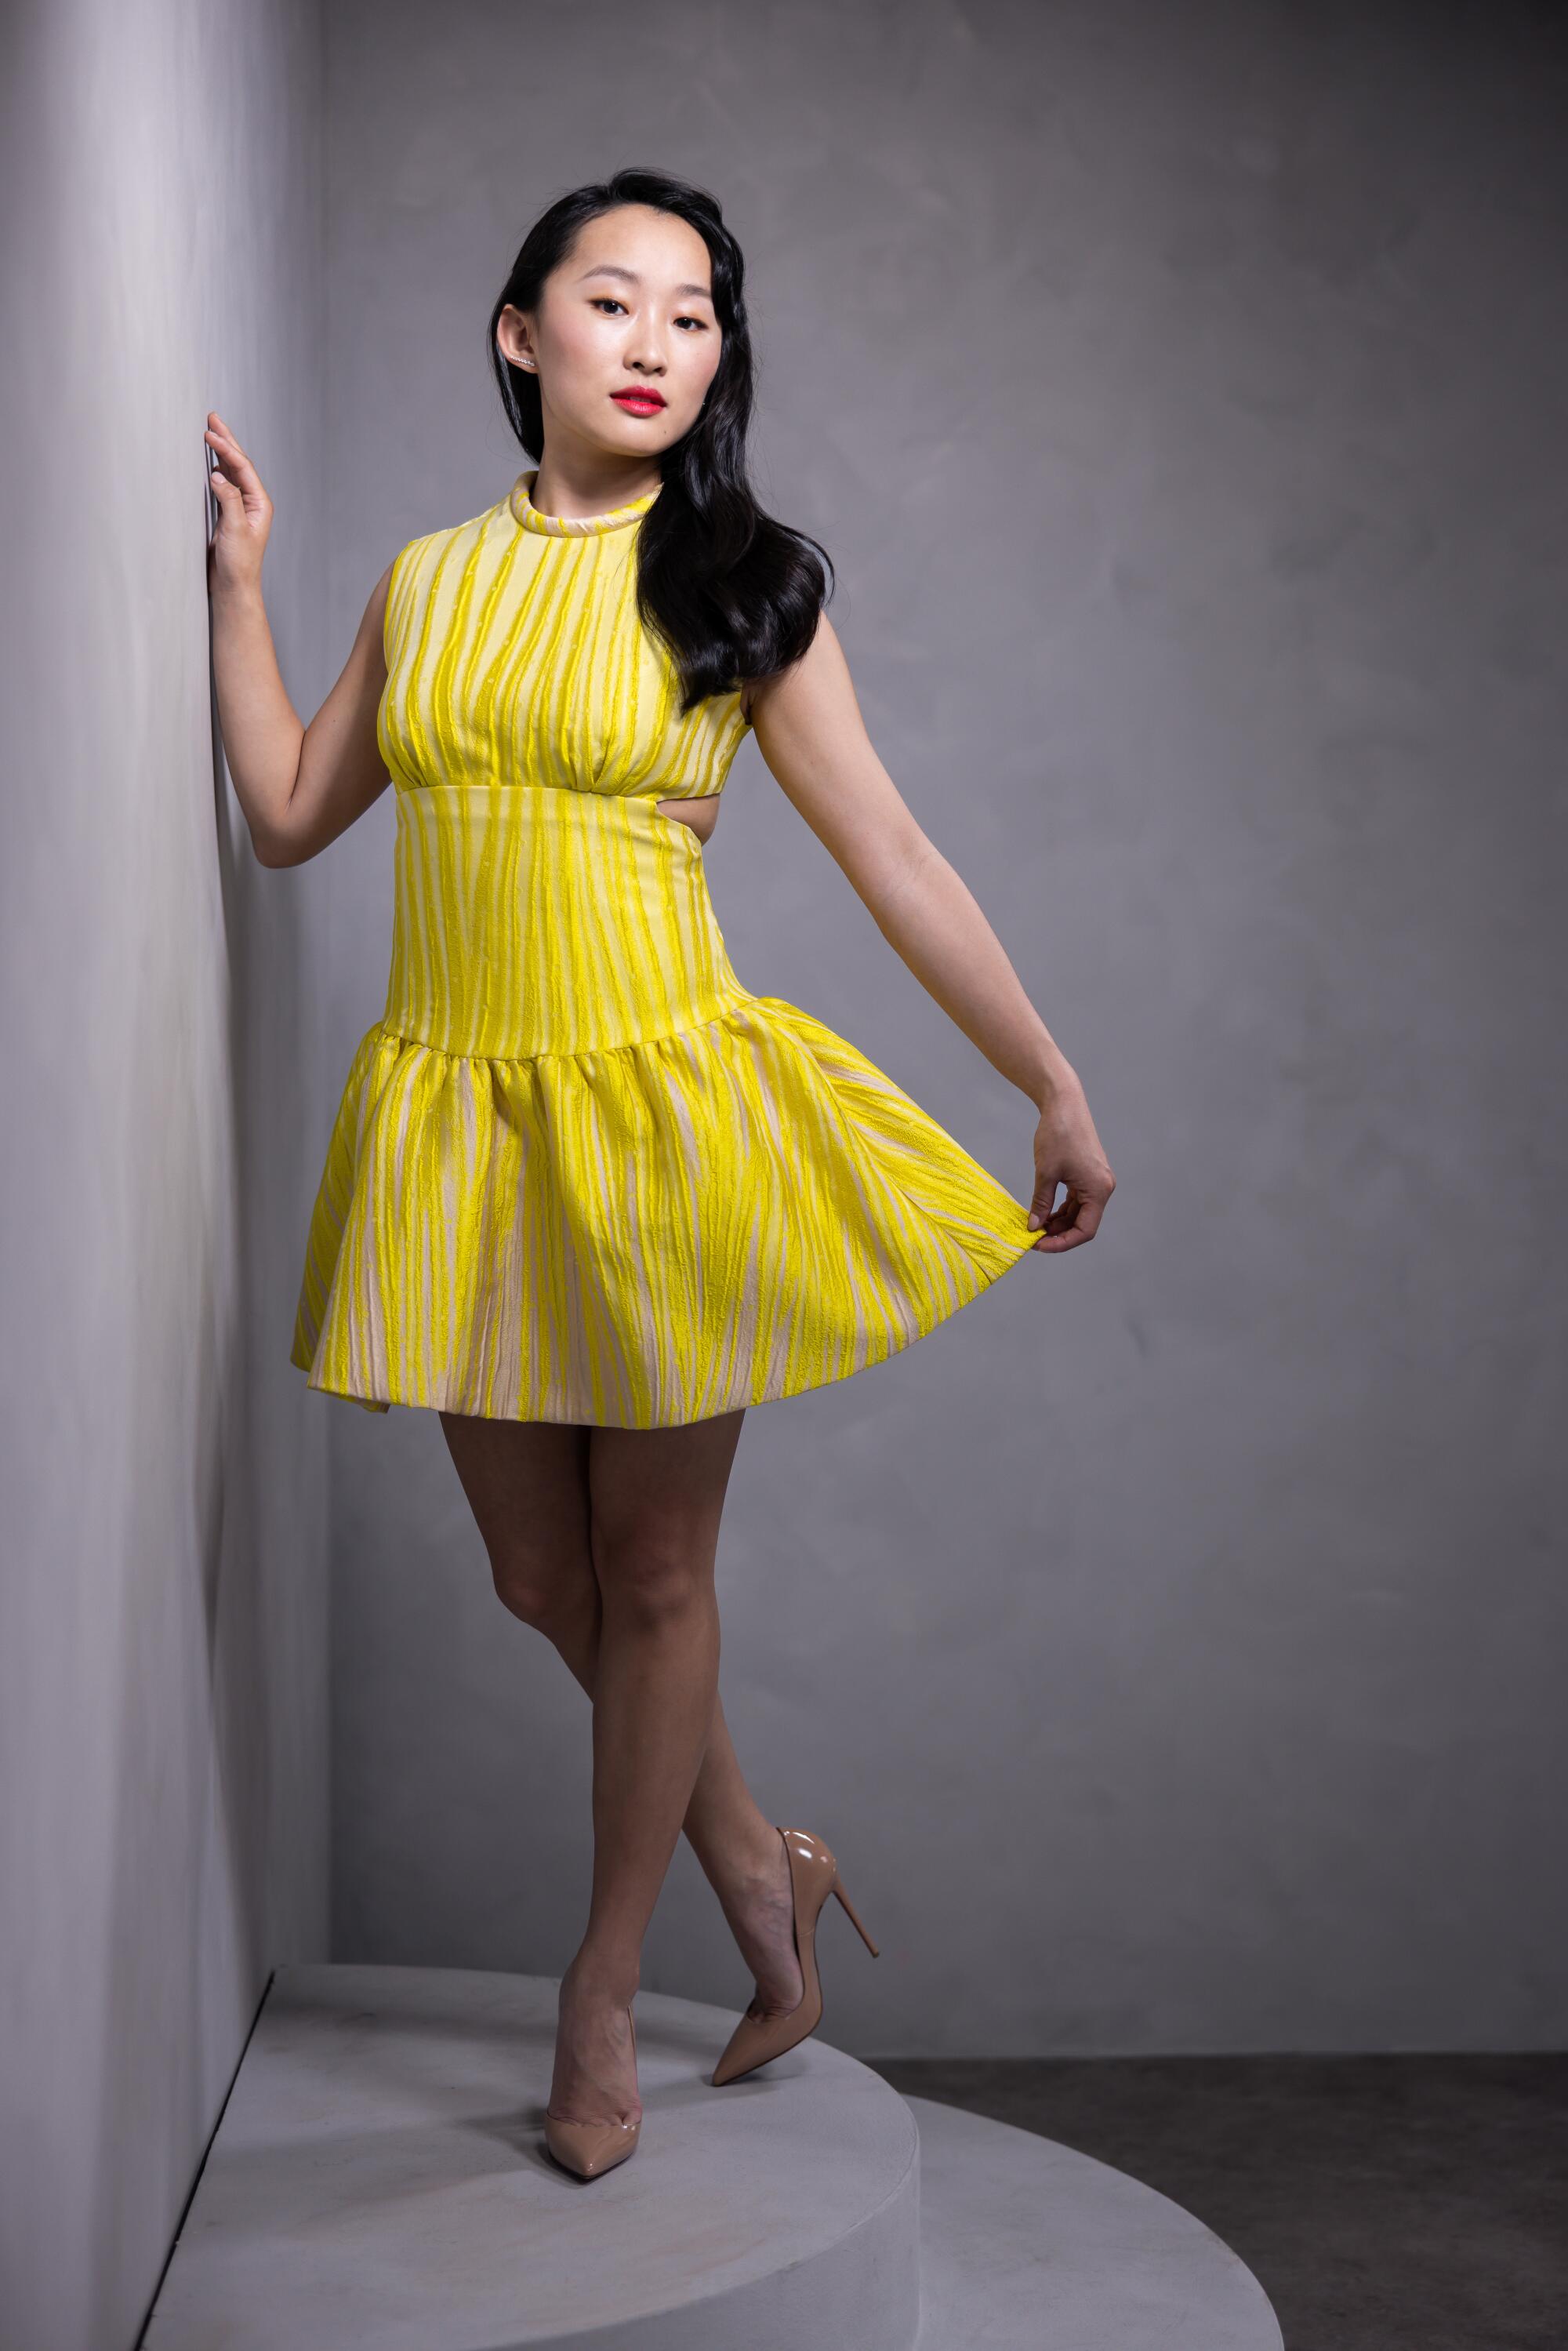  Wearing a bright yellow dress, Ji-young Yoo leans against a wall for a portrait.